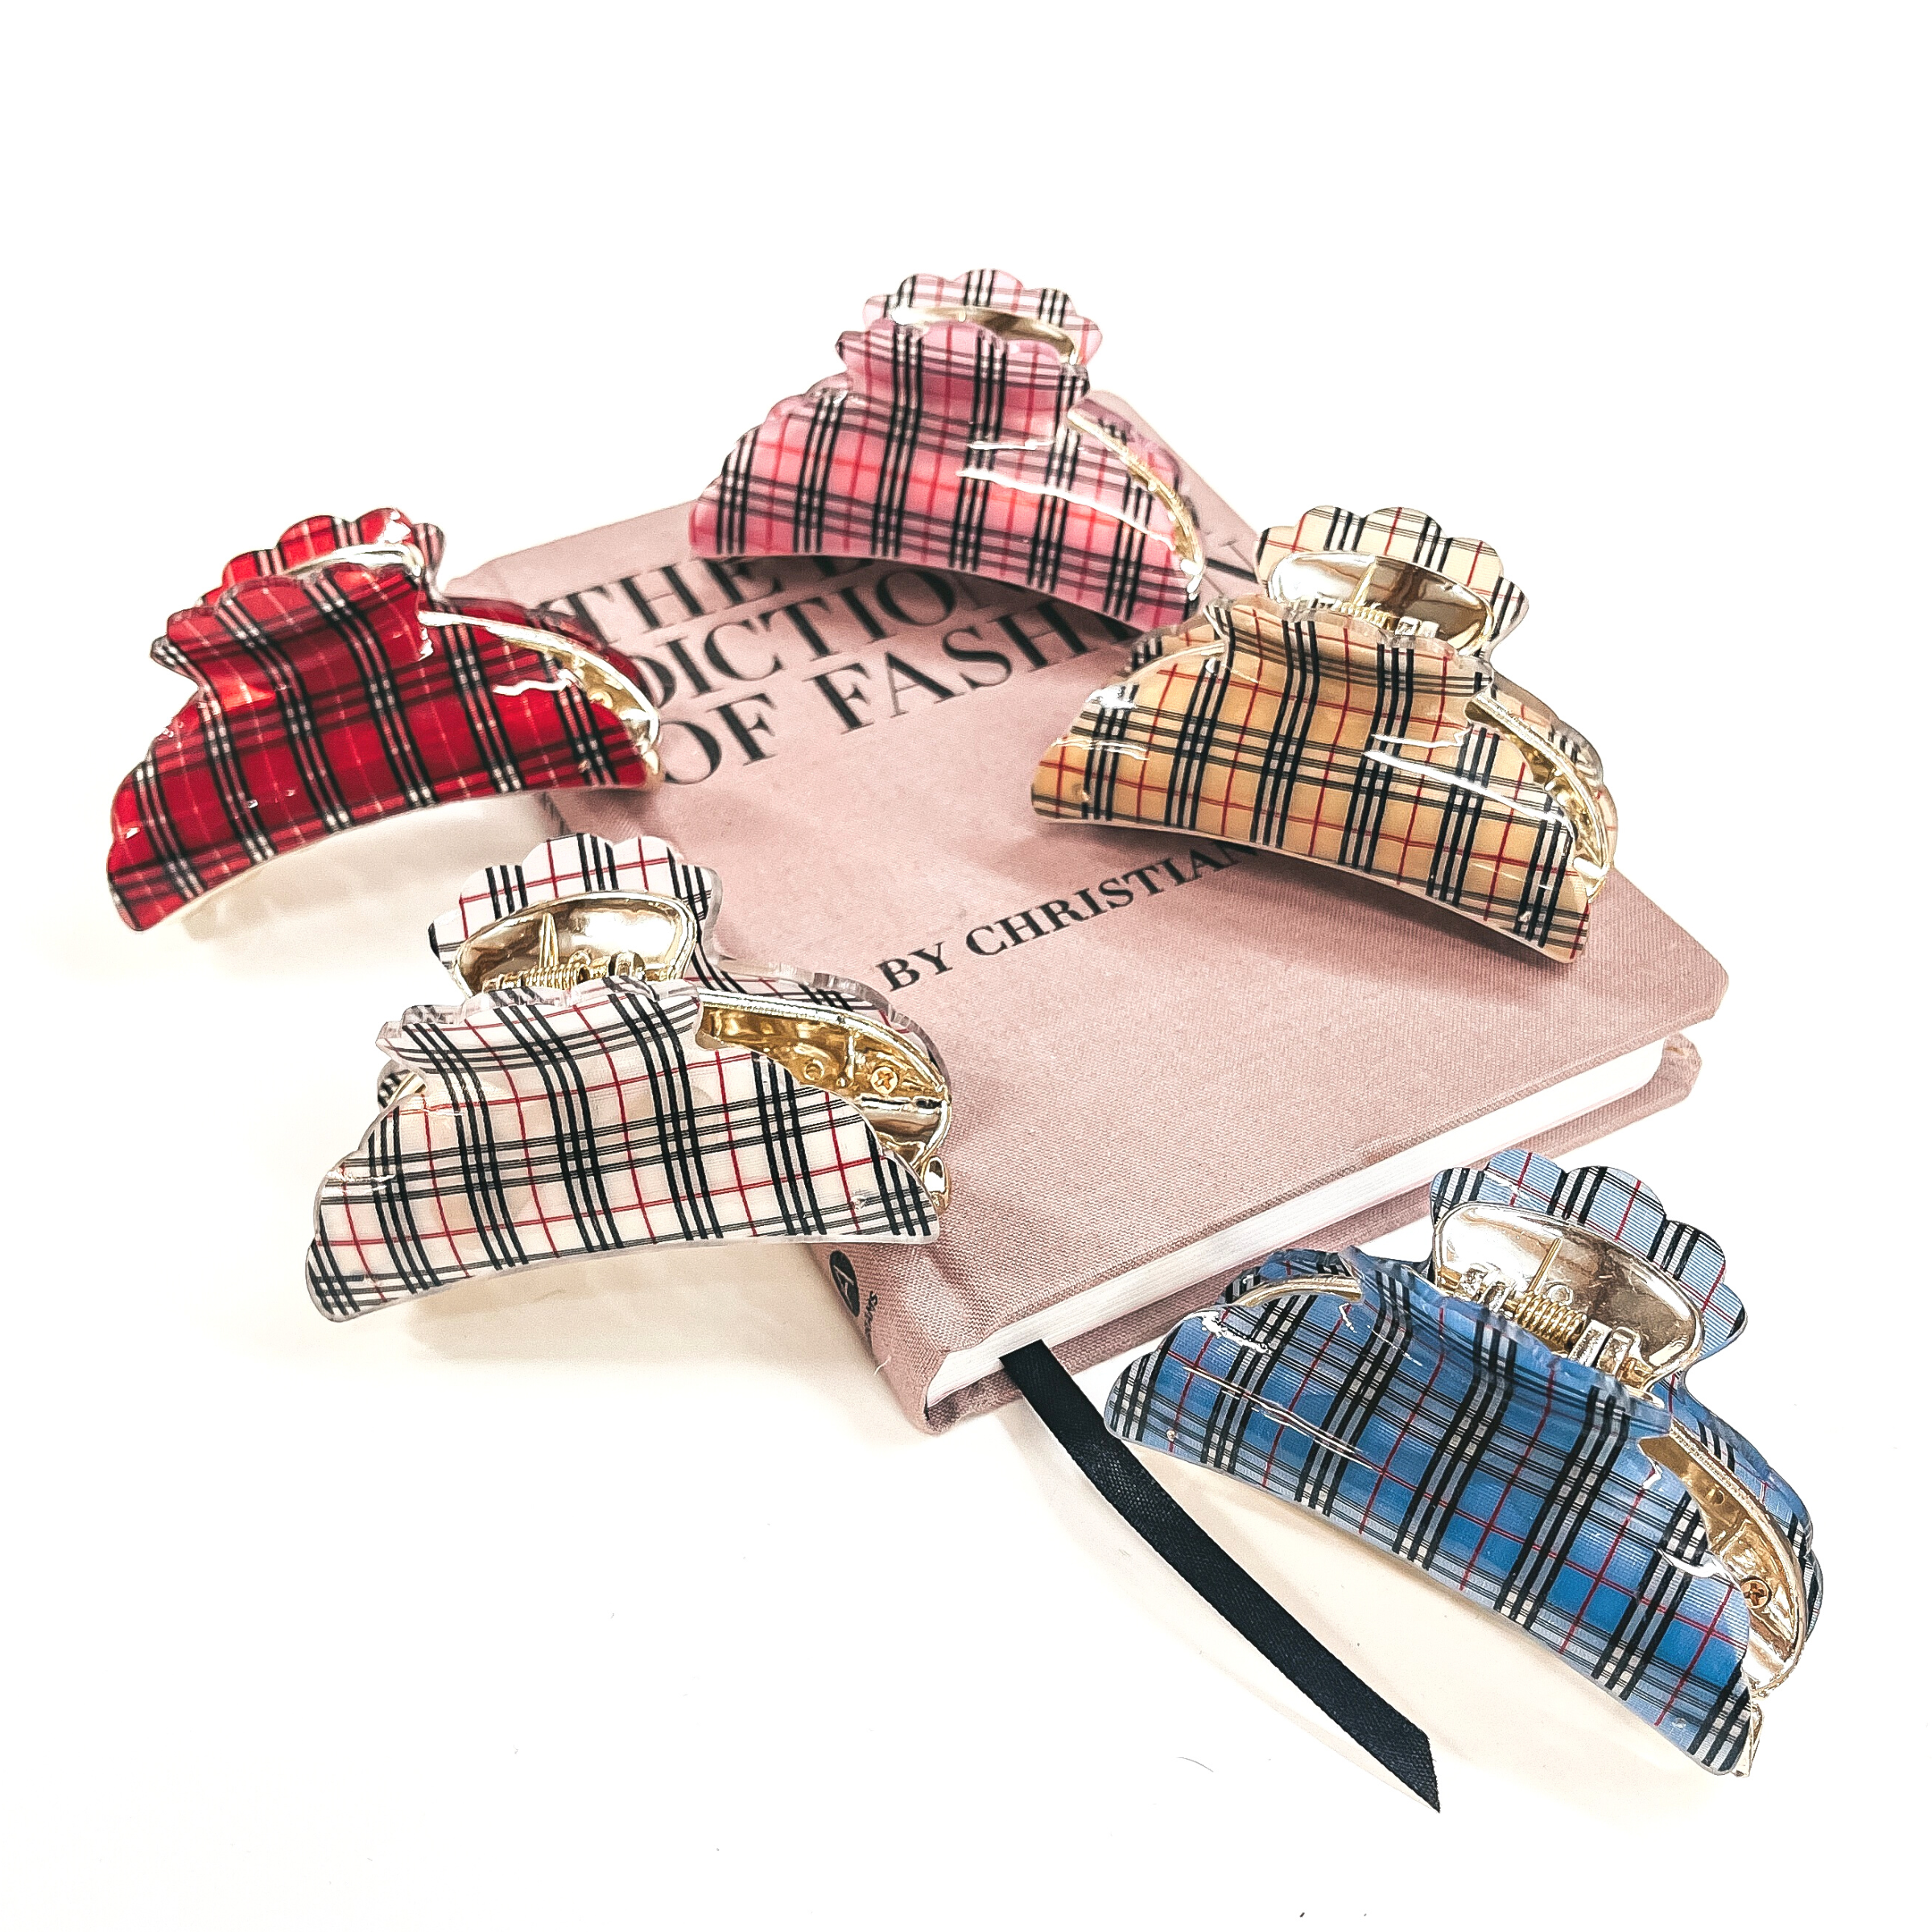 These are five plaid print and gold hair clips laying on a a pink book and on a white background. There is a pink, red, tan, white, and blue plaid print clips.